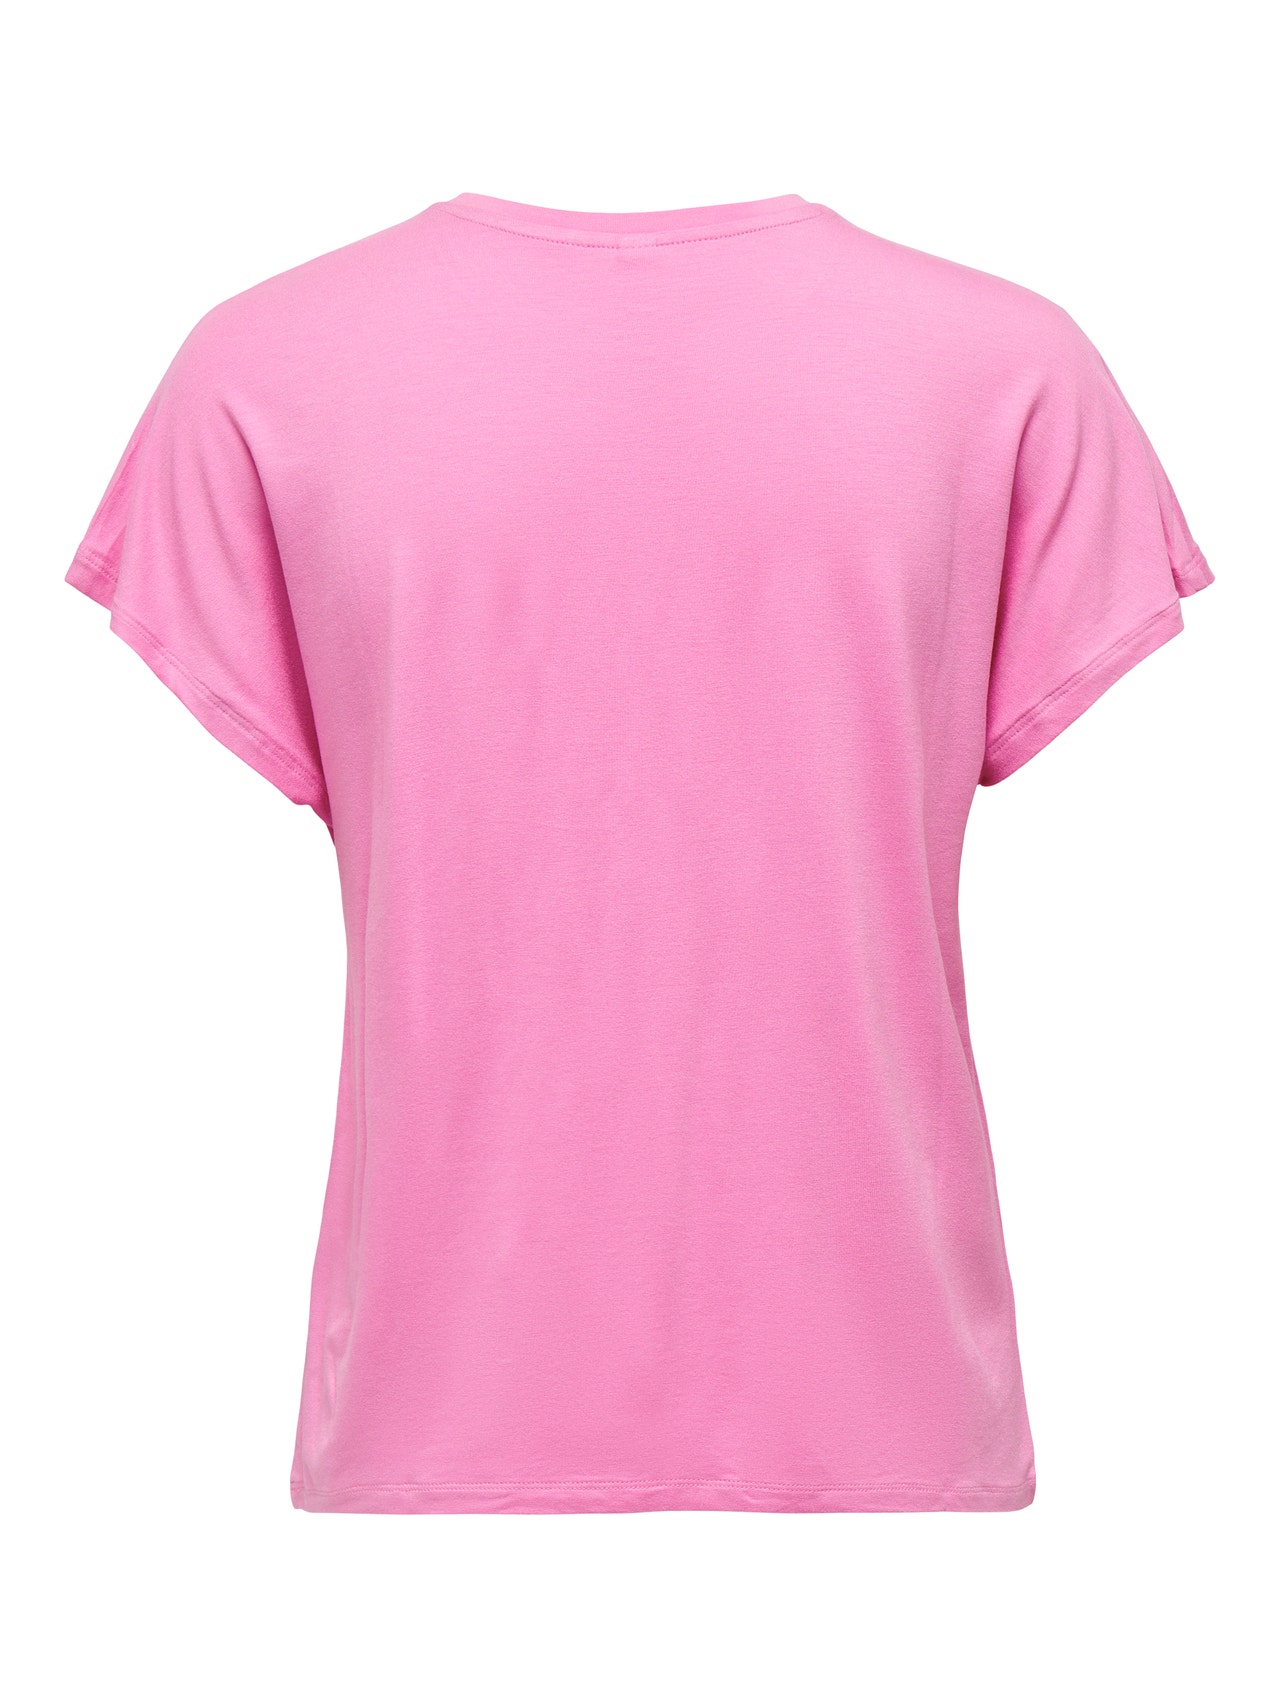 ONLY Einfarbiges T-Shirt -Fuchsia Pink - 15257232